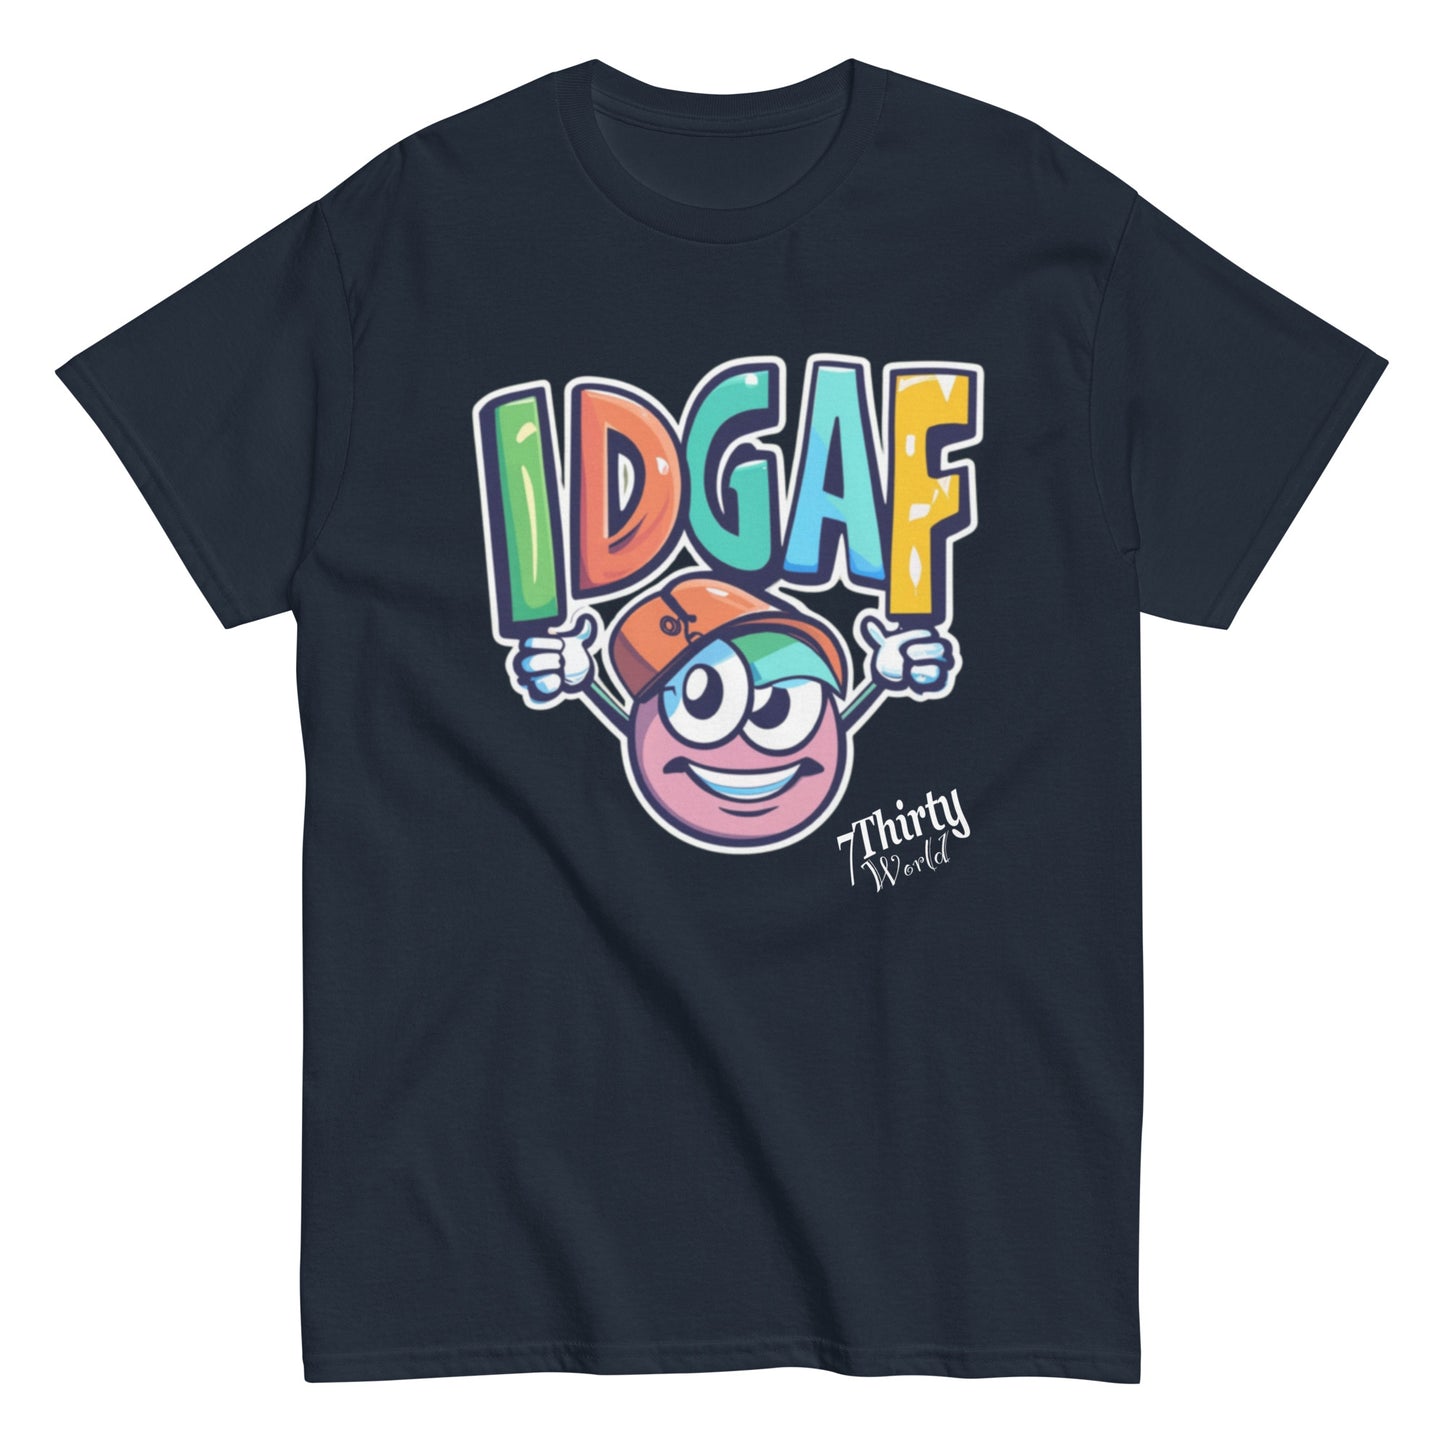 7ThirtyWorld "IDGAF v1" NFT-Shirt from the "Say It With Ya Chest" Collection